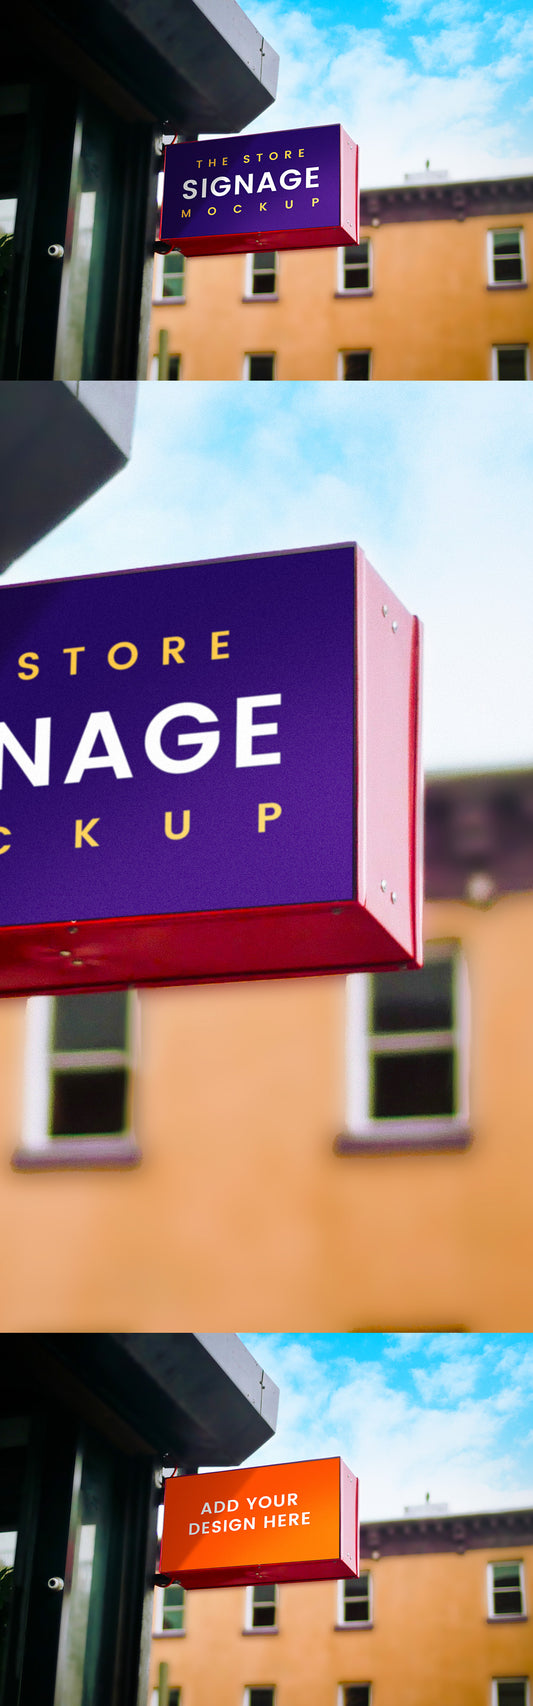 Free Outdoor Store Signage Mockup